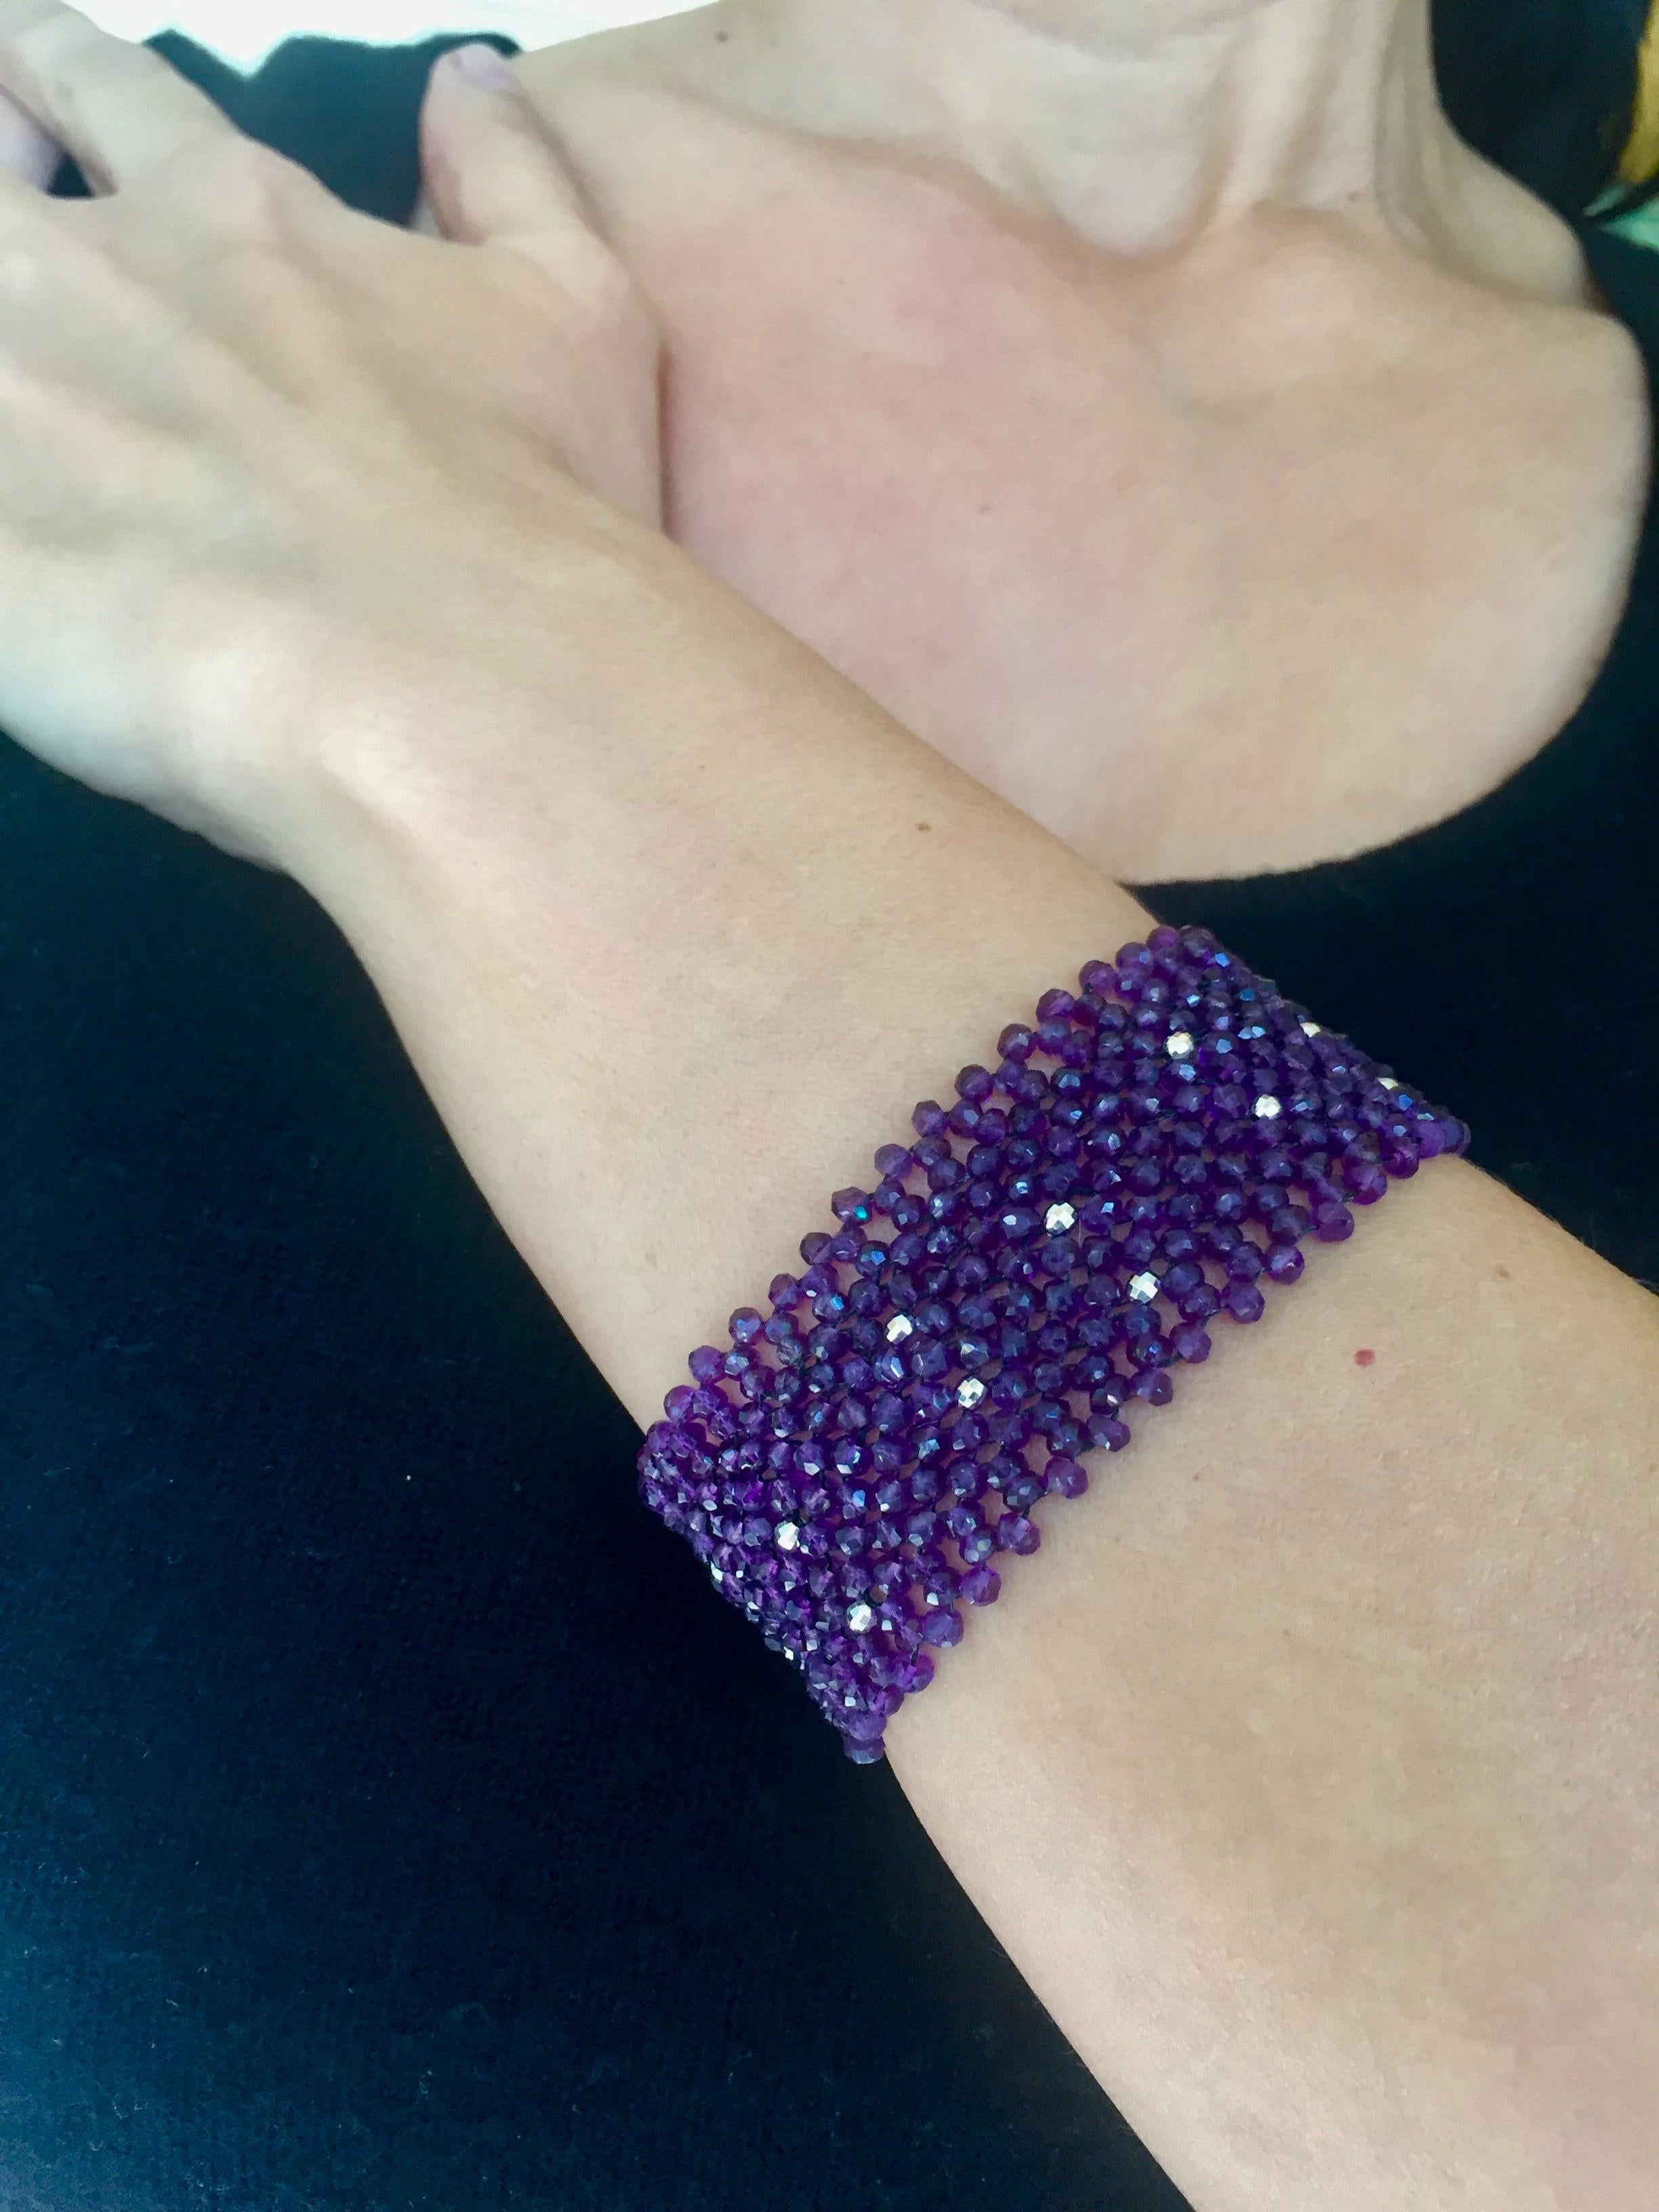 The woven faceted amethyst cuff bracelet with sterling silver clasp and beads is a beautiful shade of deep purple. At 1.25 inches wide and 7.15 inches long this bracelet gracefully drapes the wrist. The rhodium-plated silver beads twinkle throughout